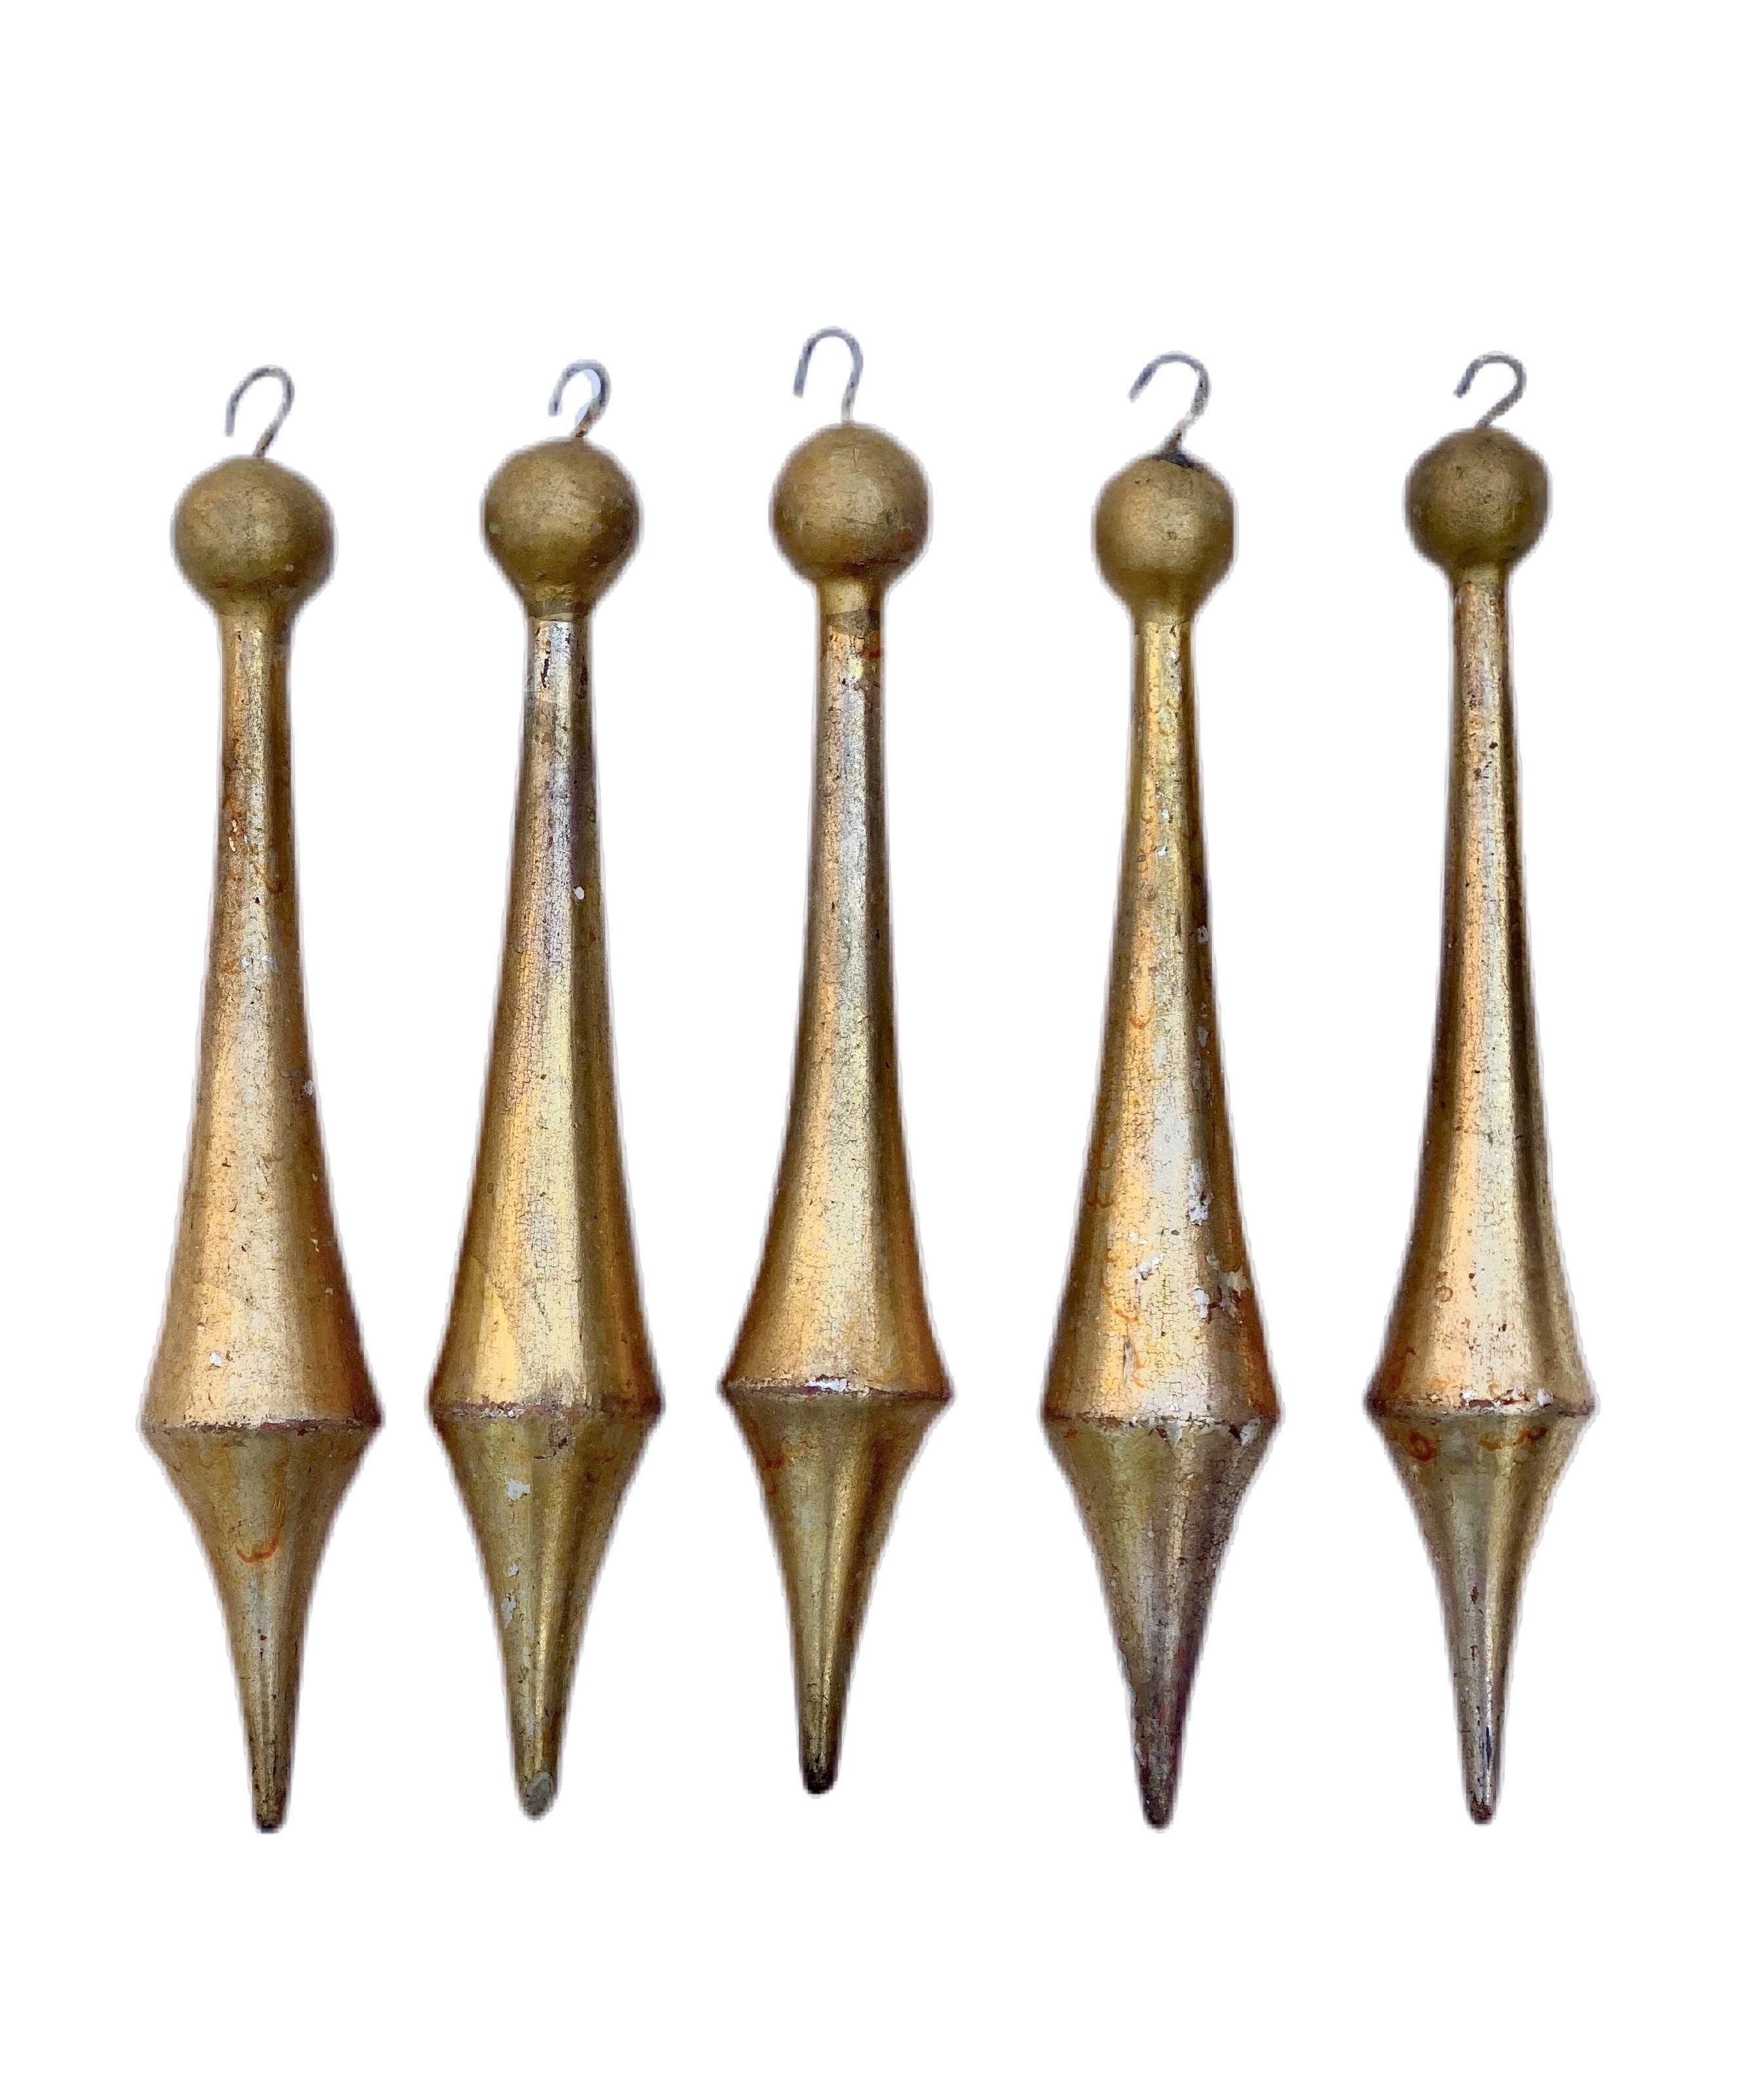 18th Century and Earlier 18th Century Italian Gold Leaf Rococo Tassel Ornaments (7 sets of 5)